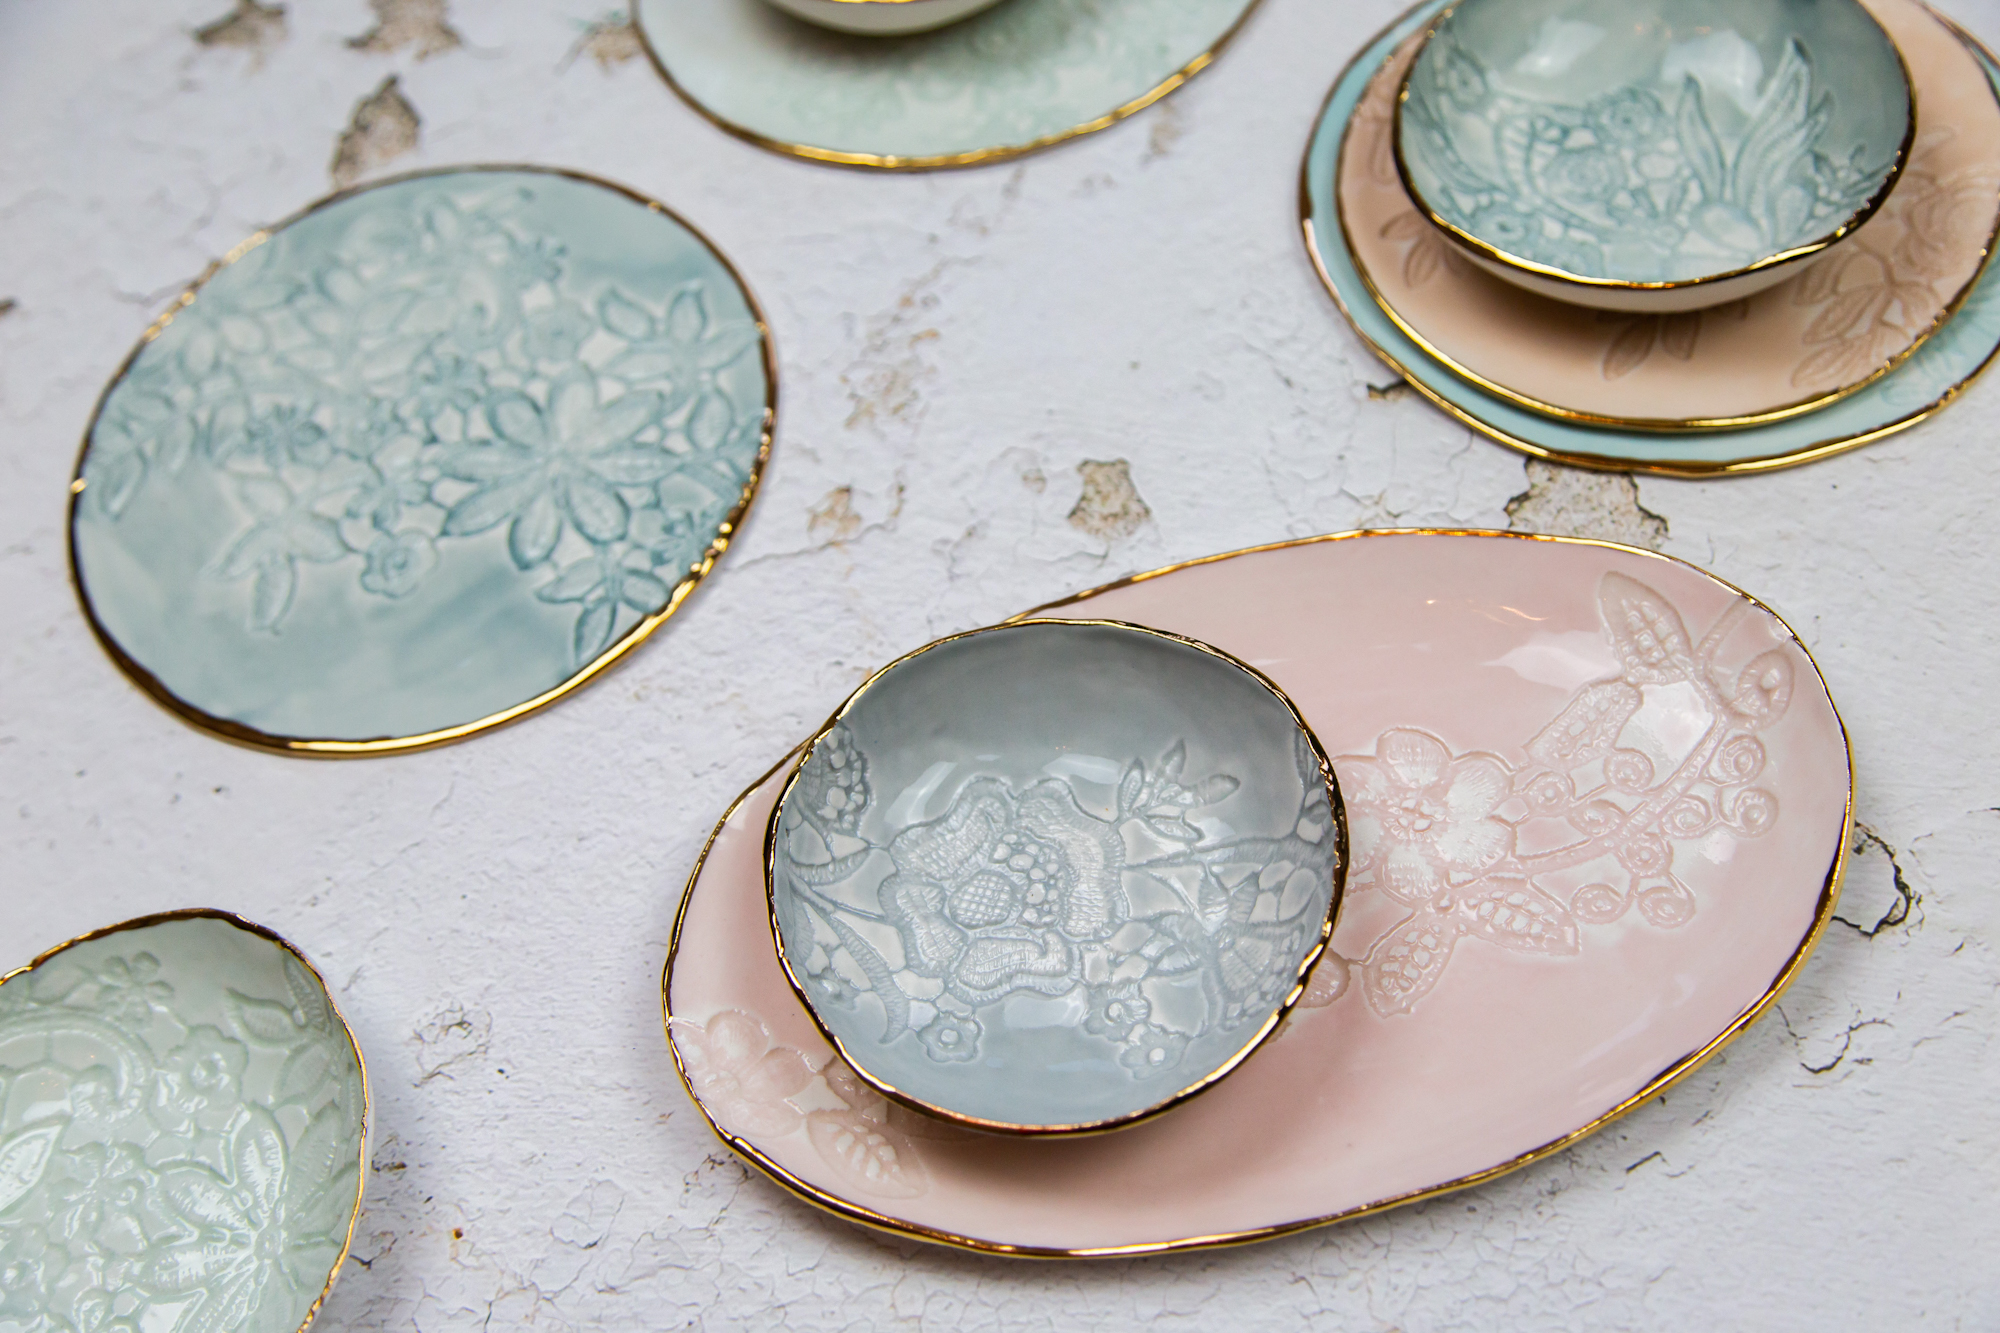 Lace Printed Plates and Bowls. Porcelain with pastel glazes and gold lustre accents. Sizes range from 14-30cm wide